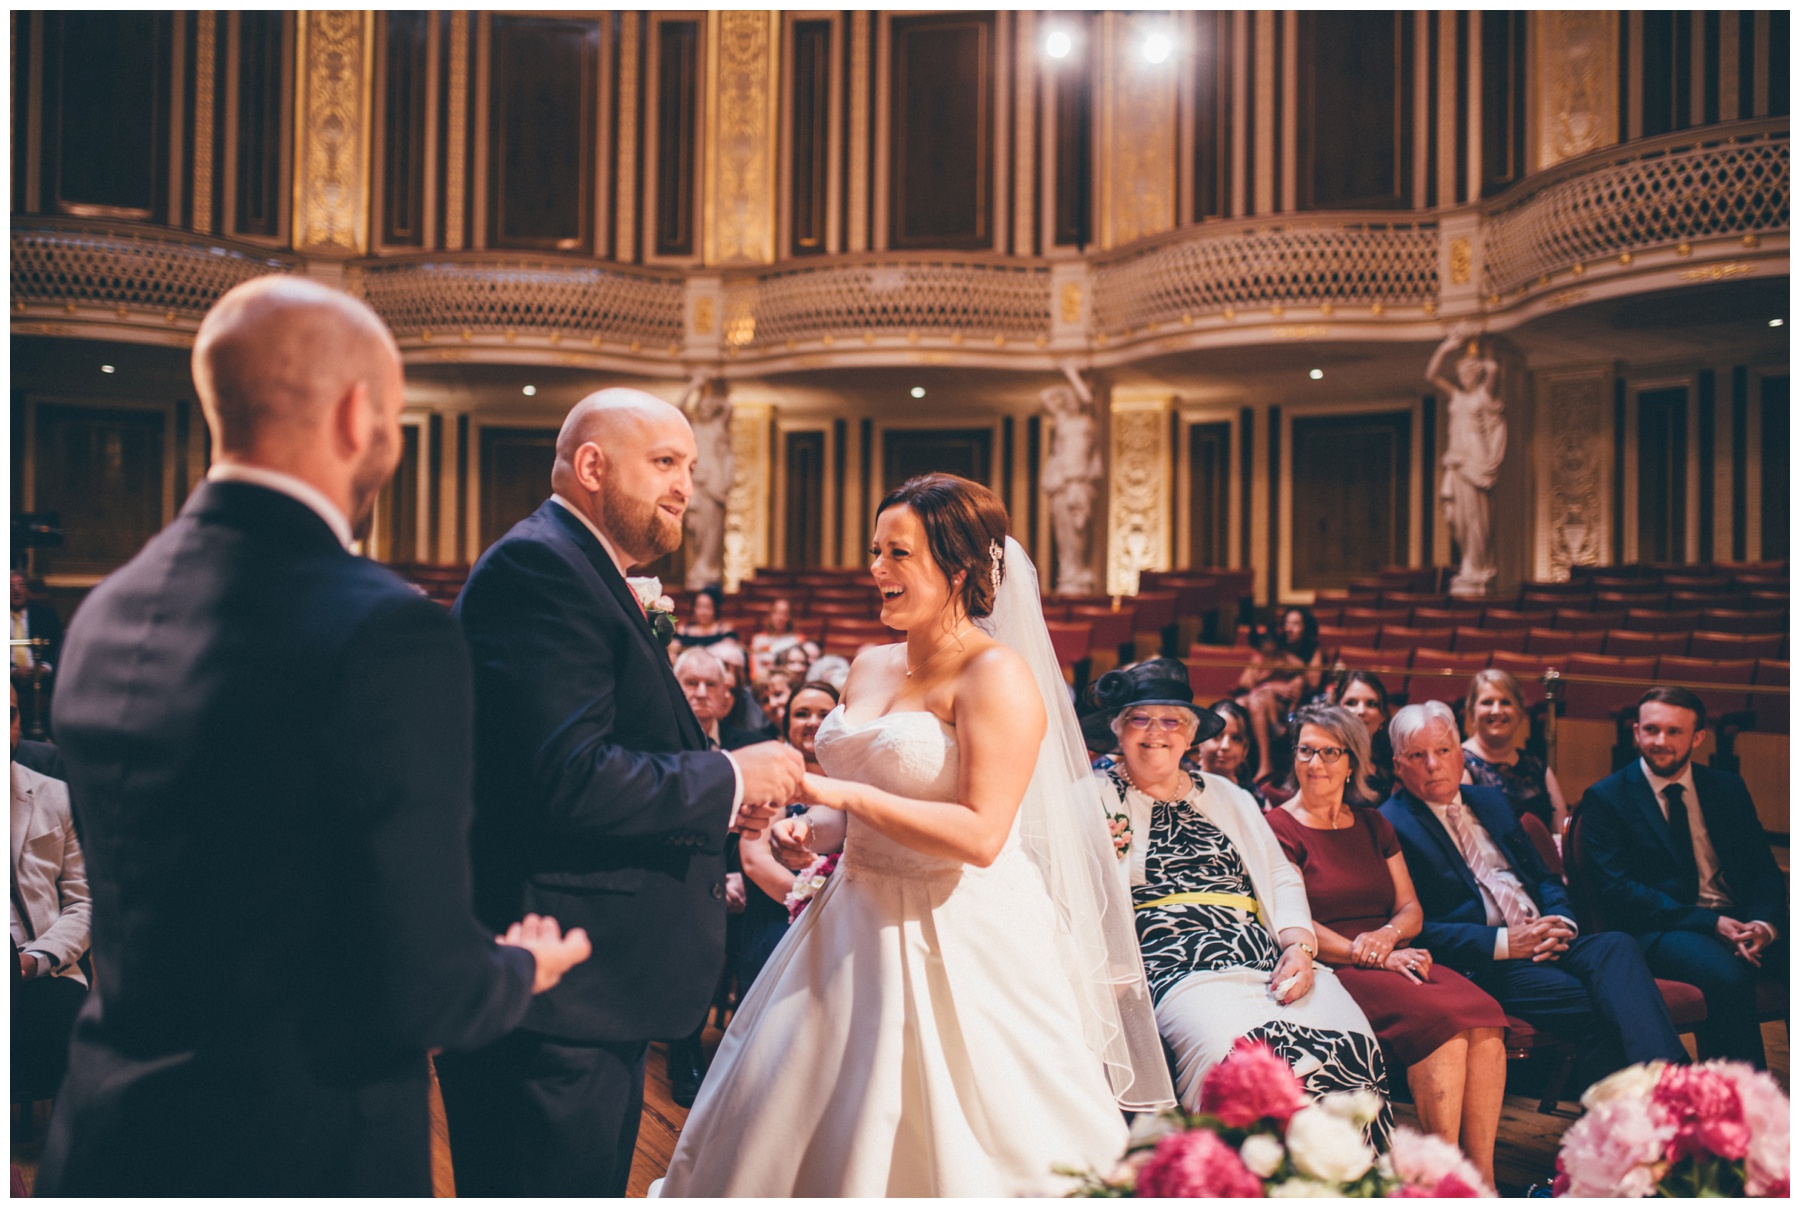 St Georges Hall wedding in Liverpool City Centre.